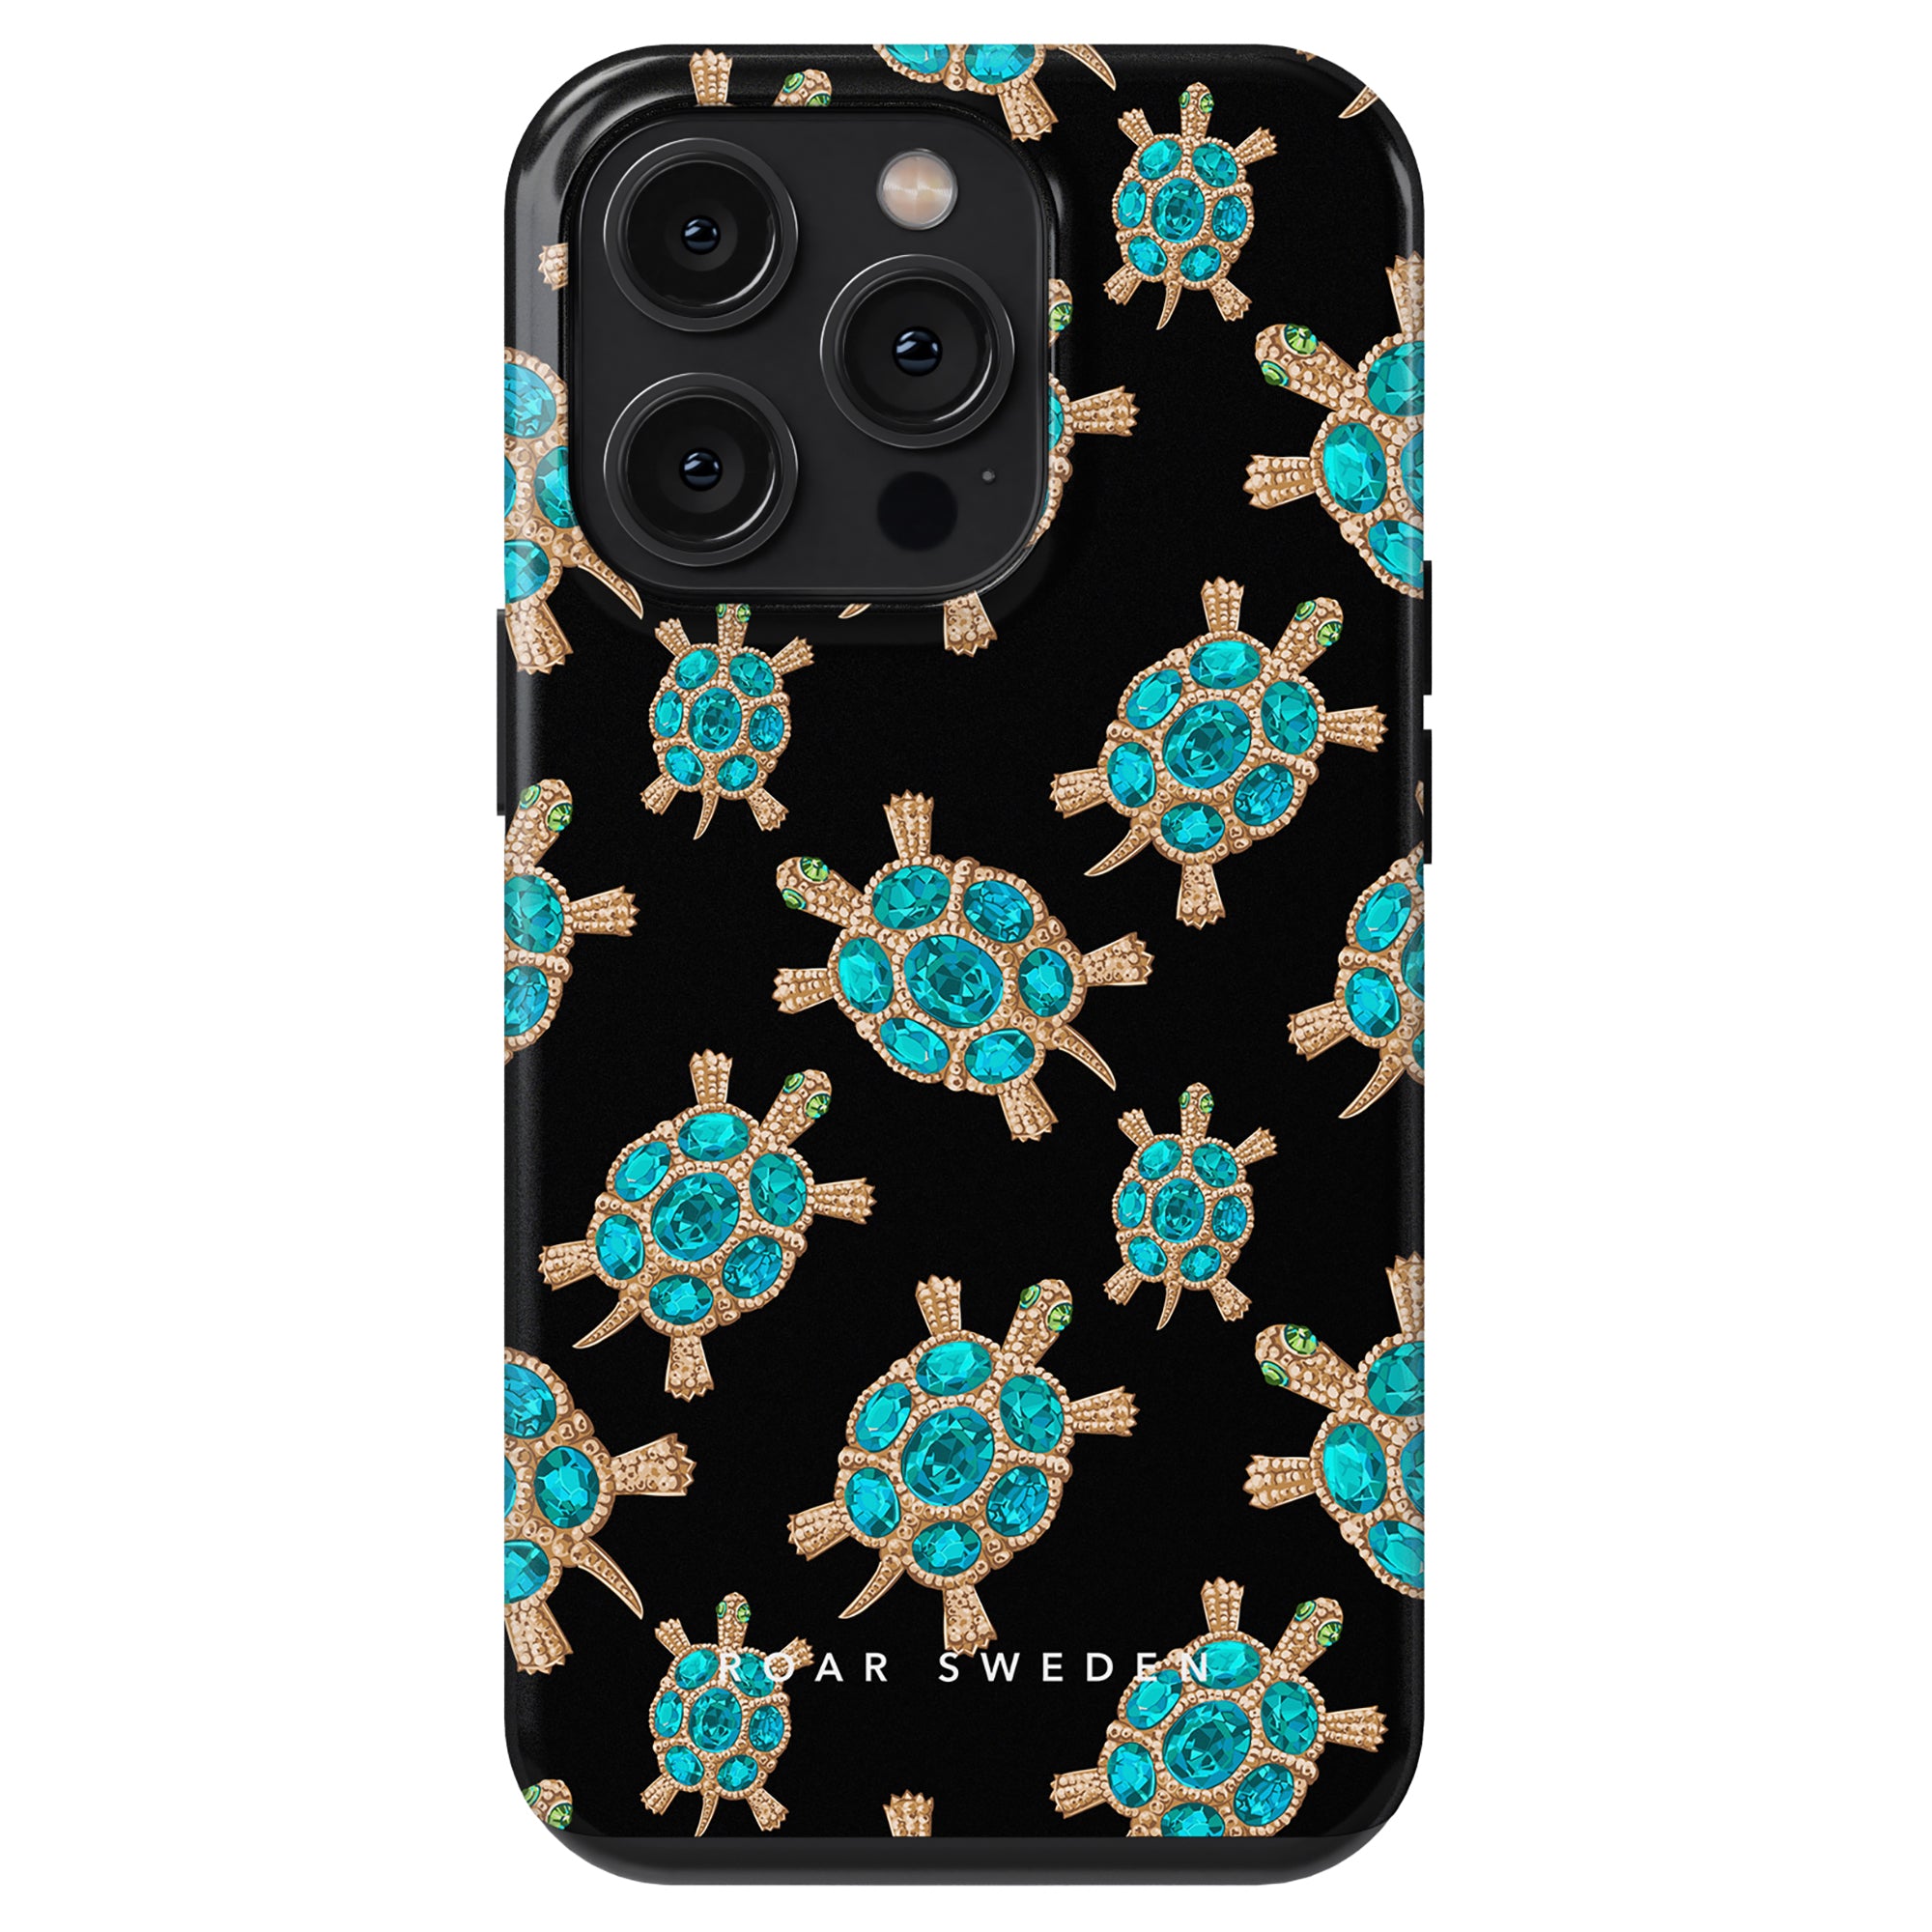 Black smartphone case with Diamond Turtle - Tough Case with turquoise pattern and ROAR SWEDEN brand name.